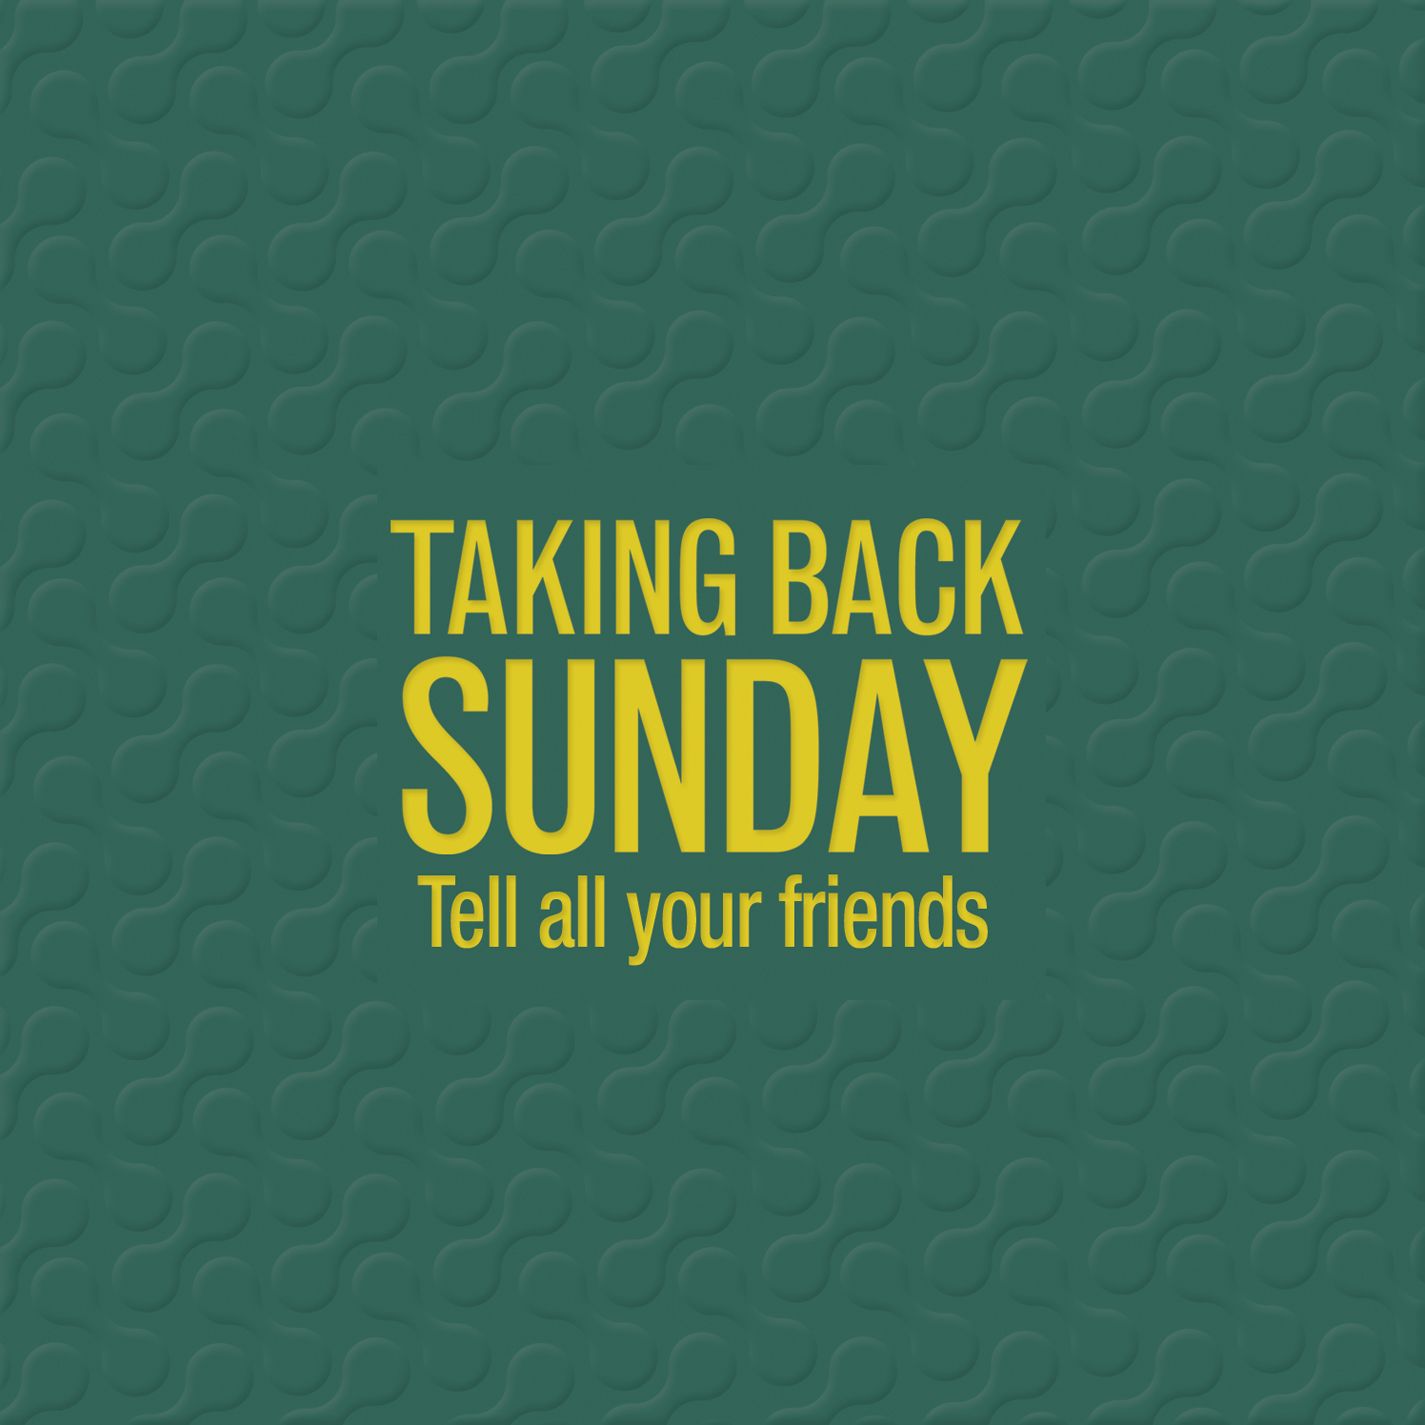 Taking Back Sunday Tell All Your Friends 38950 | MOVDATA